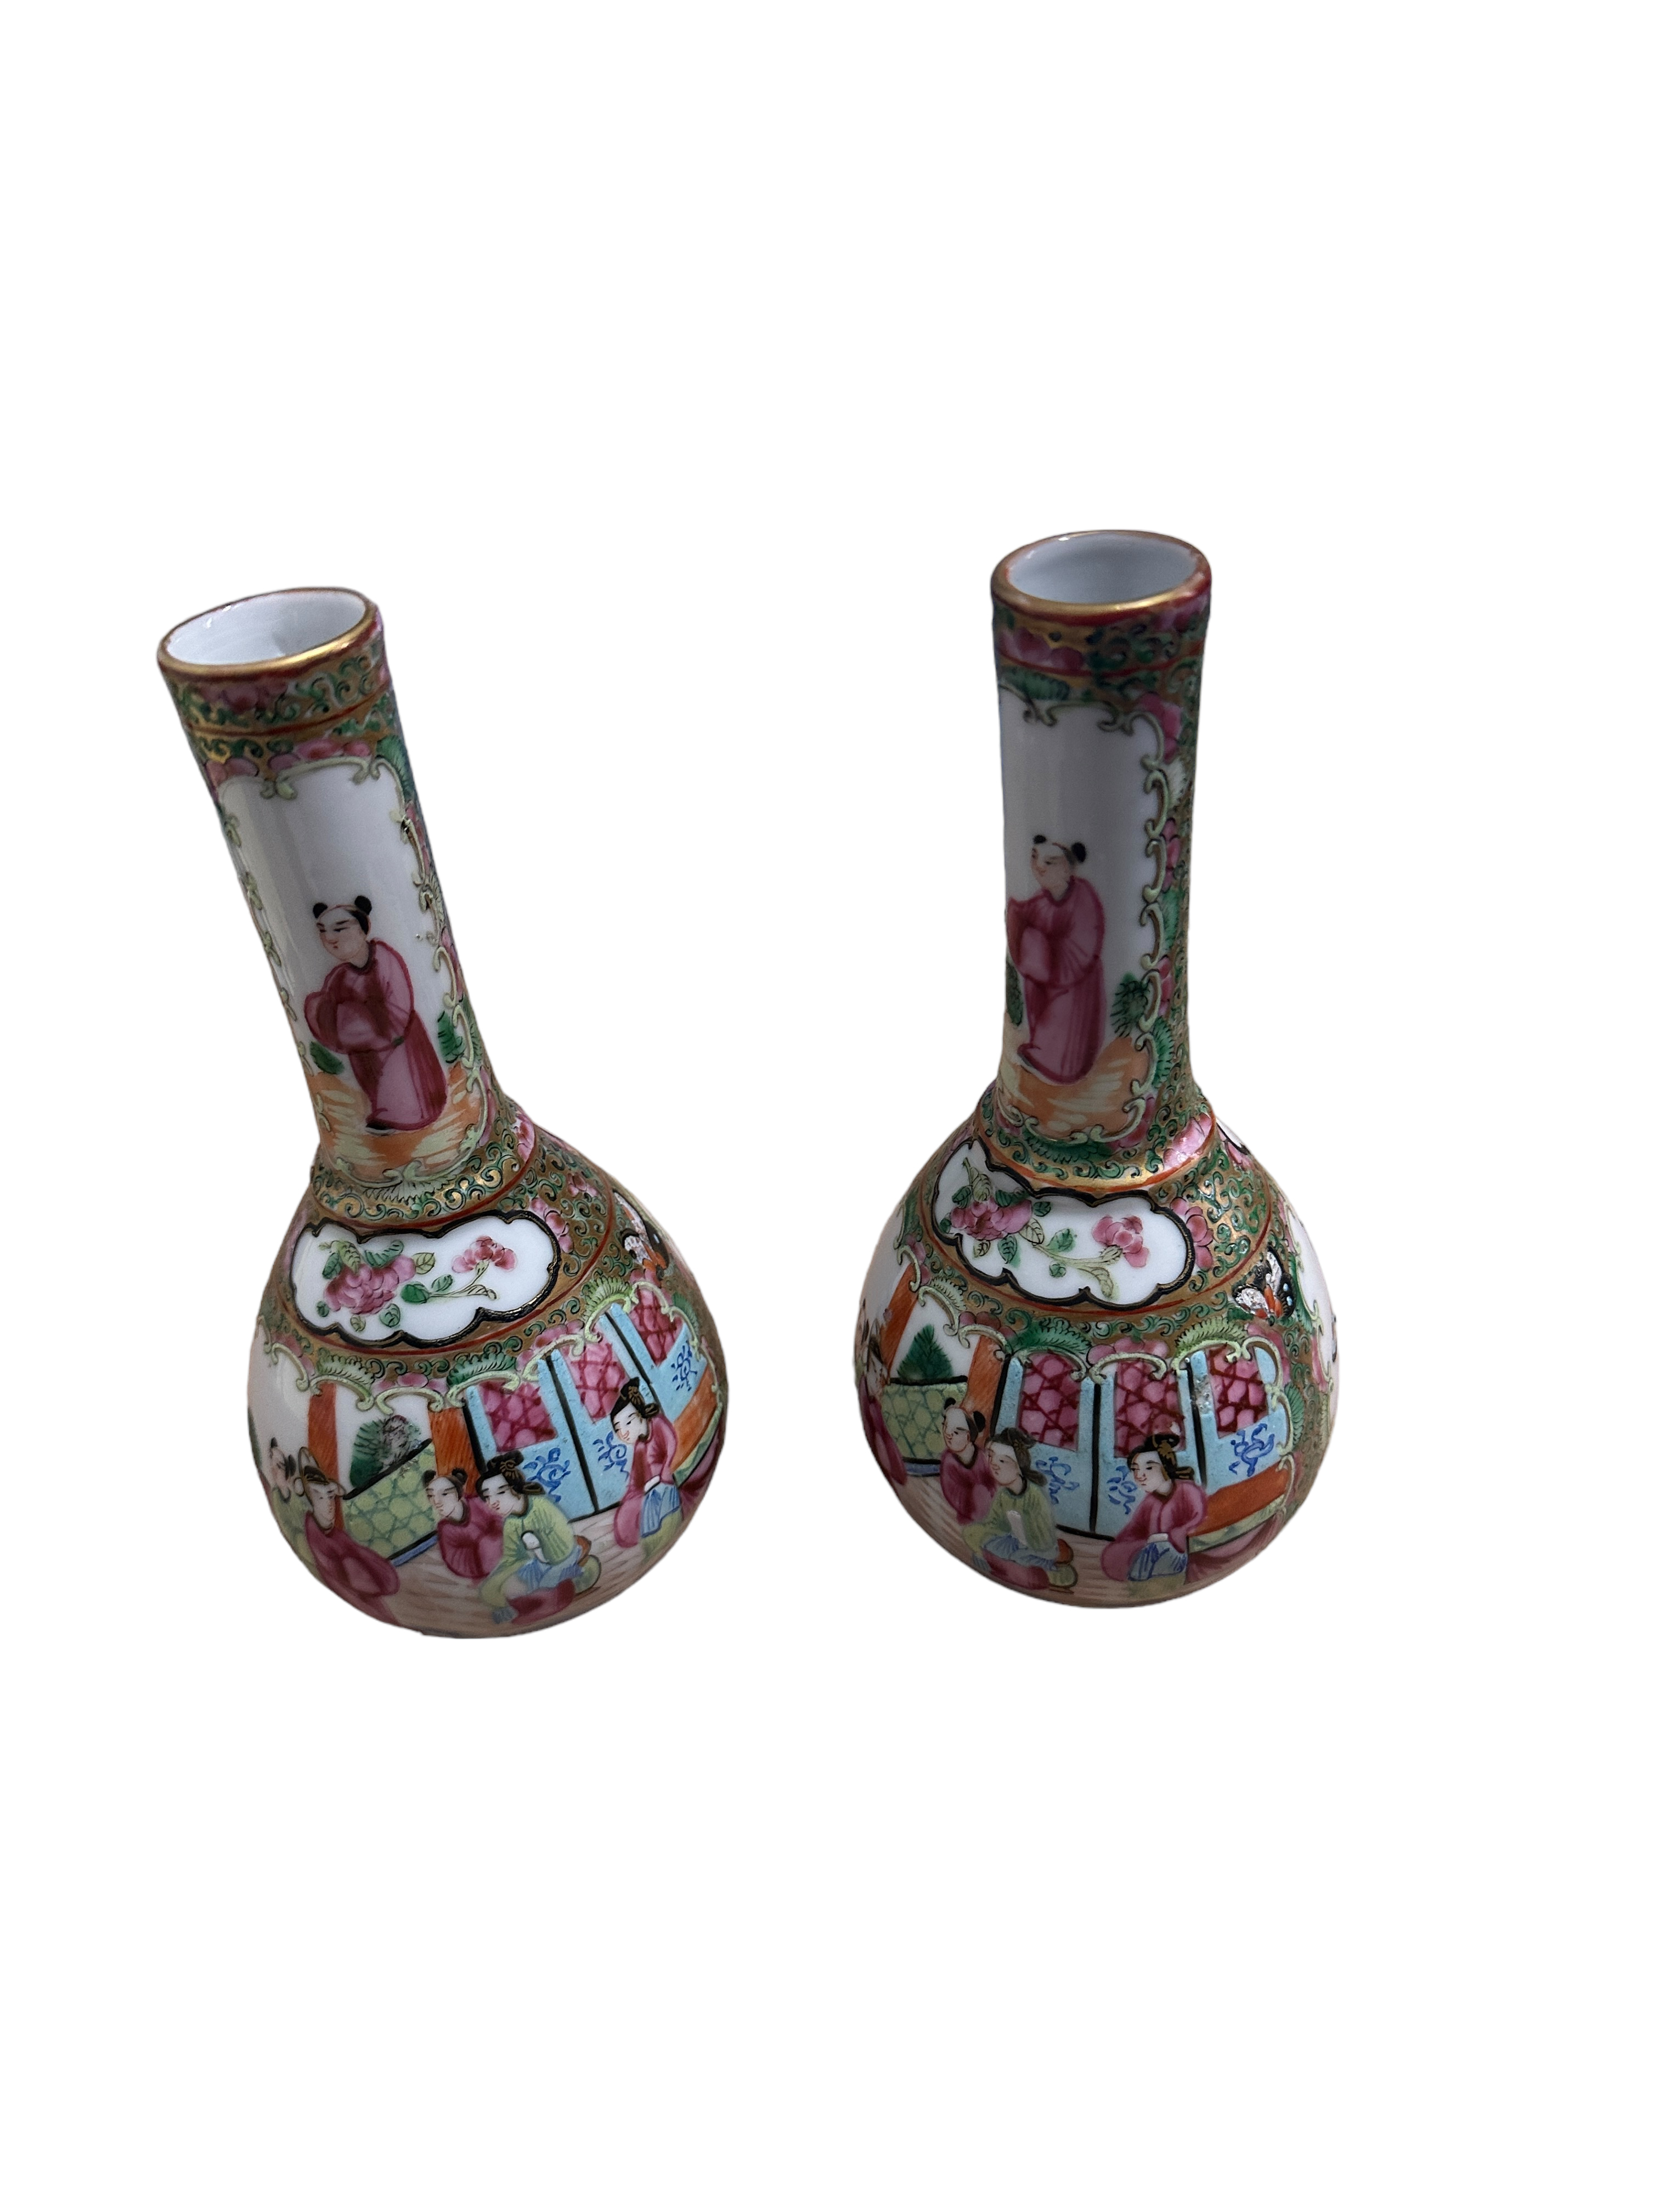 Pair of Antique Chinese Export Famille Rose Bottle Vases 20.3cm tall - diameter 10cm wides. - Image 7 of 9